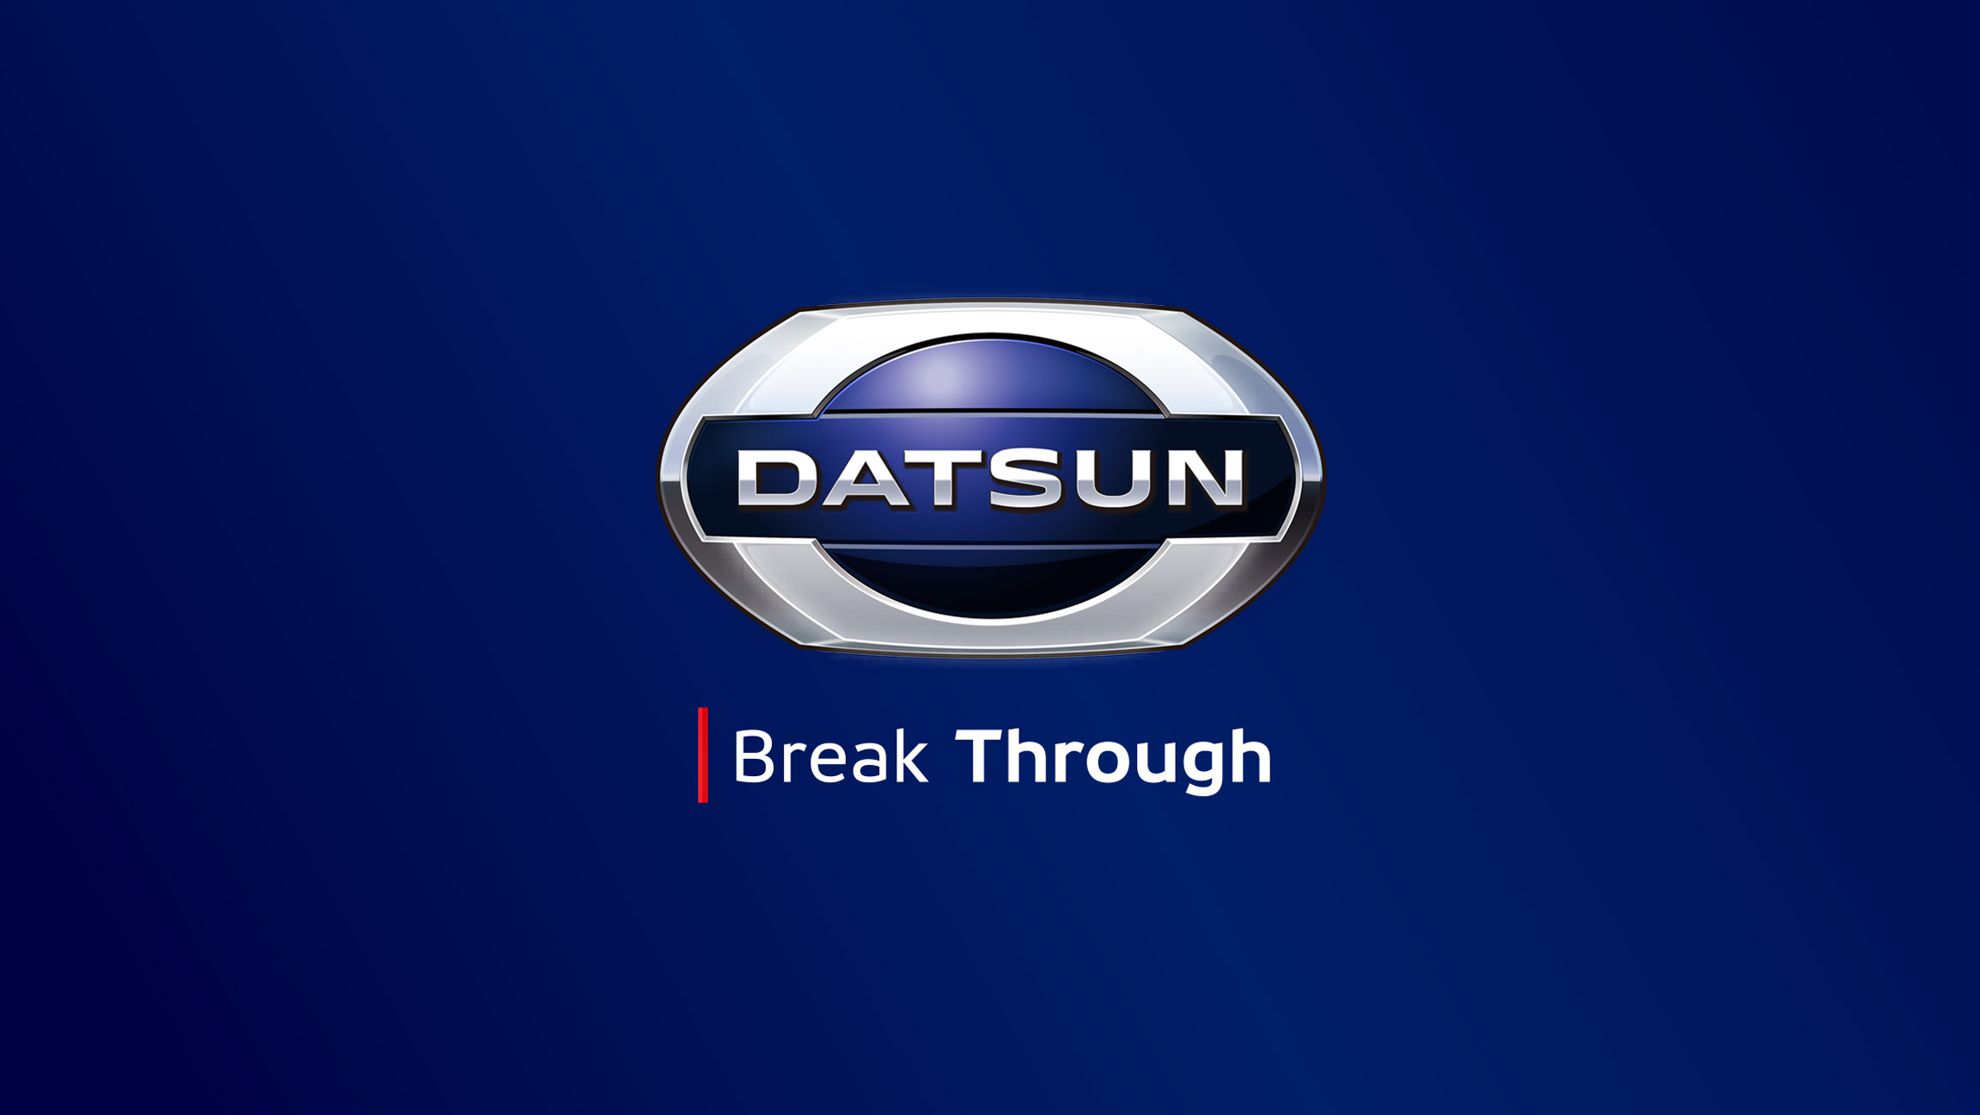 Datsun celebrates its first birthday back in SA by leading the A segment